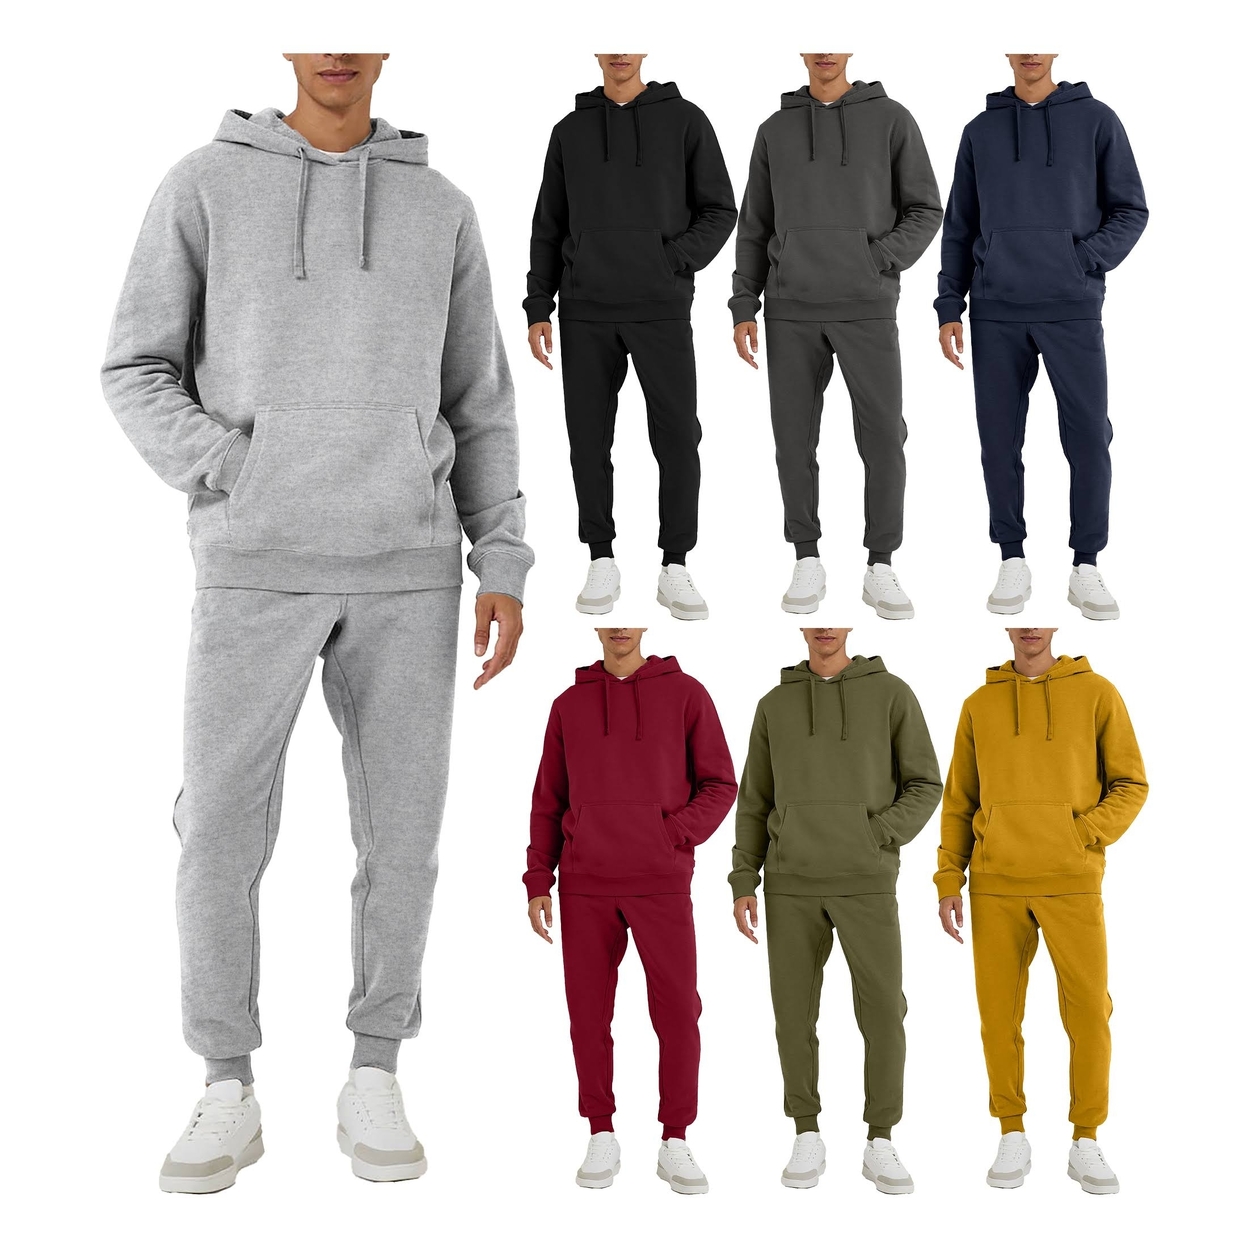 2-Pack: Men's Big & Tall Athletic Active Jogging Winter Warm Fleece Lined Pullover Tracksuit Set - Grey, Large